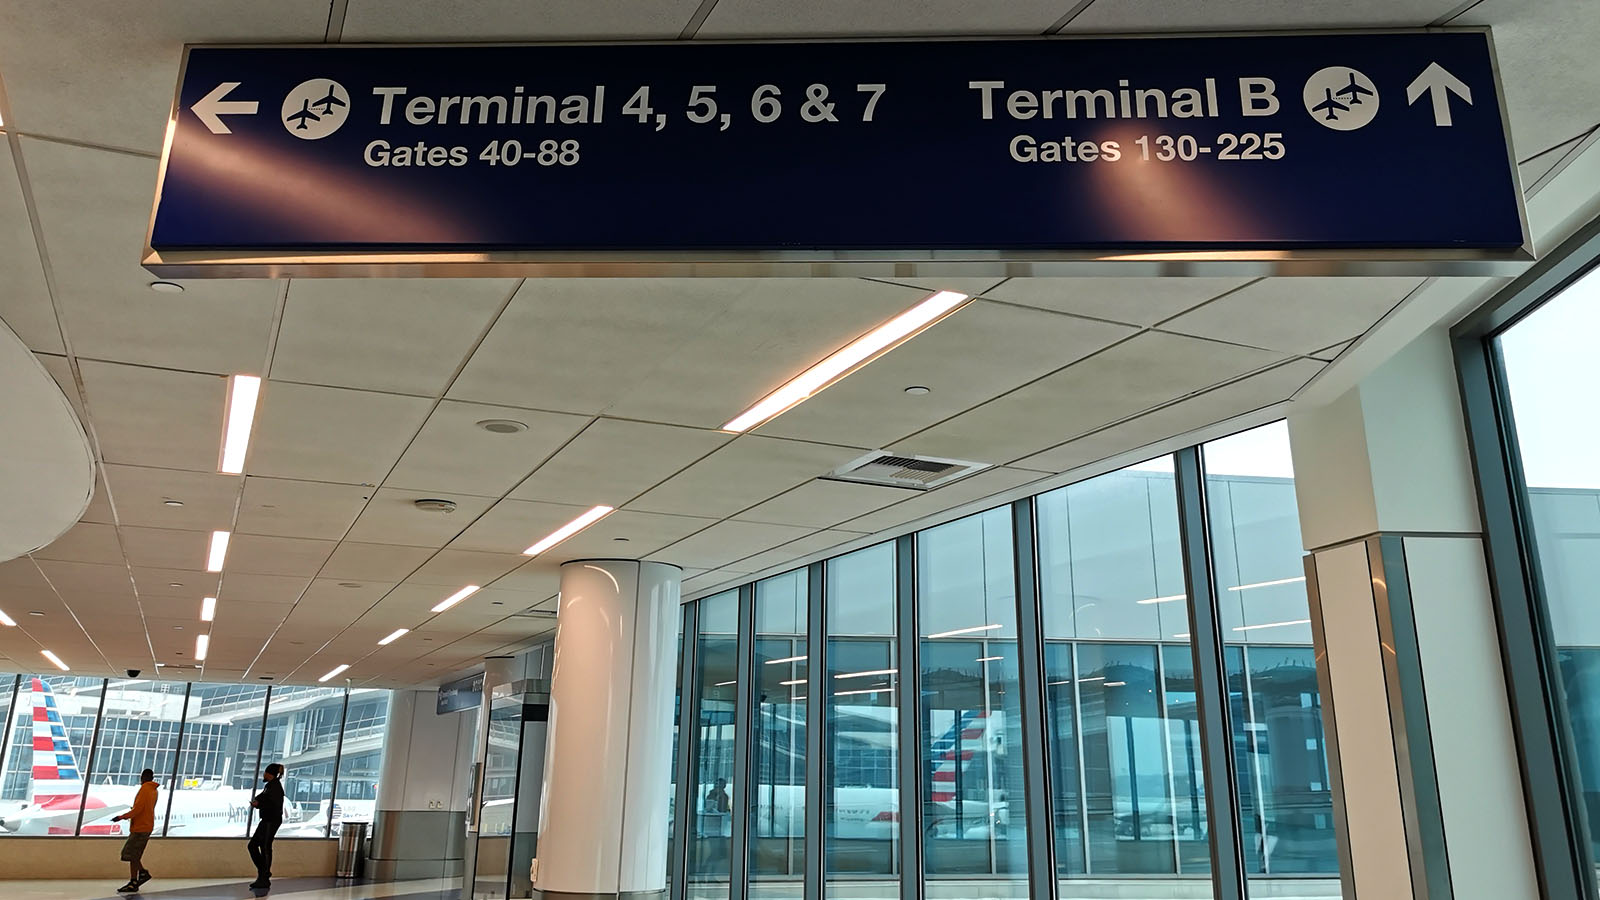 Easy terminal access in Los Angeles when flying American Airlines Boeing 737 Economy